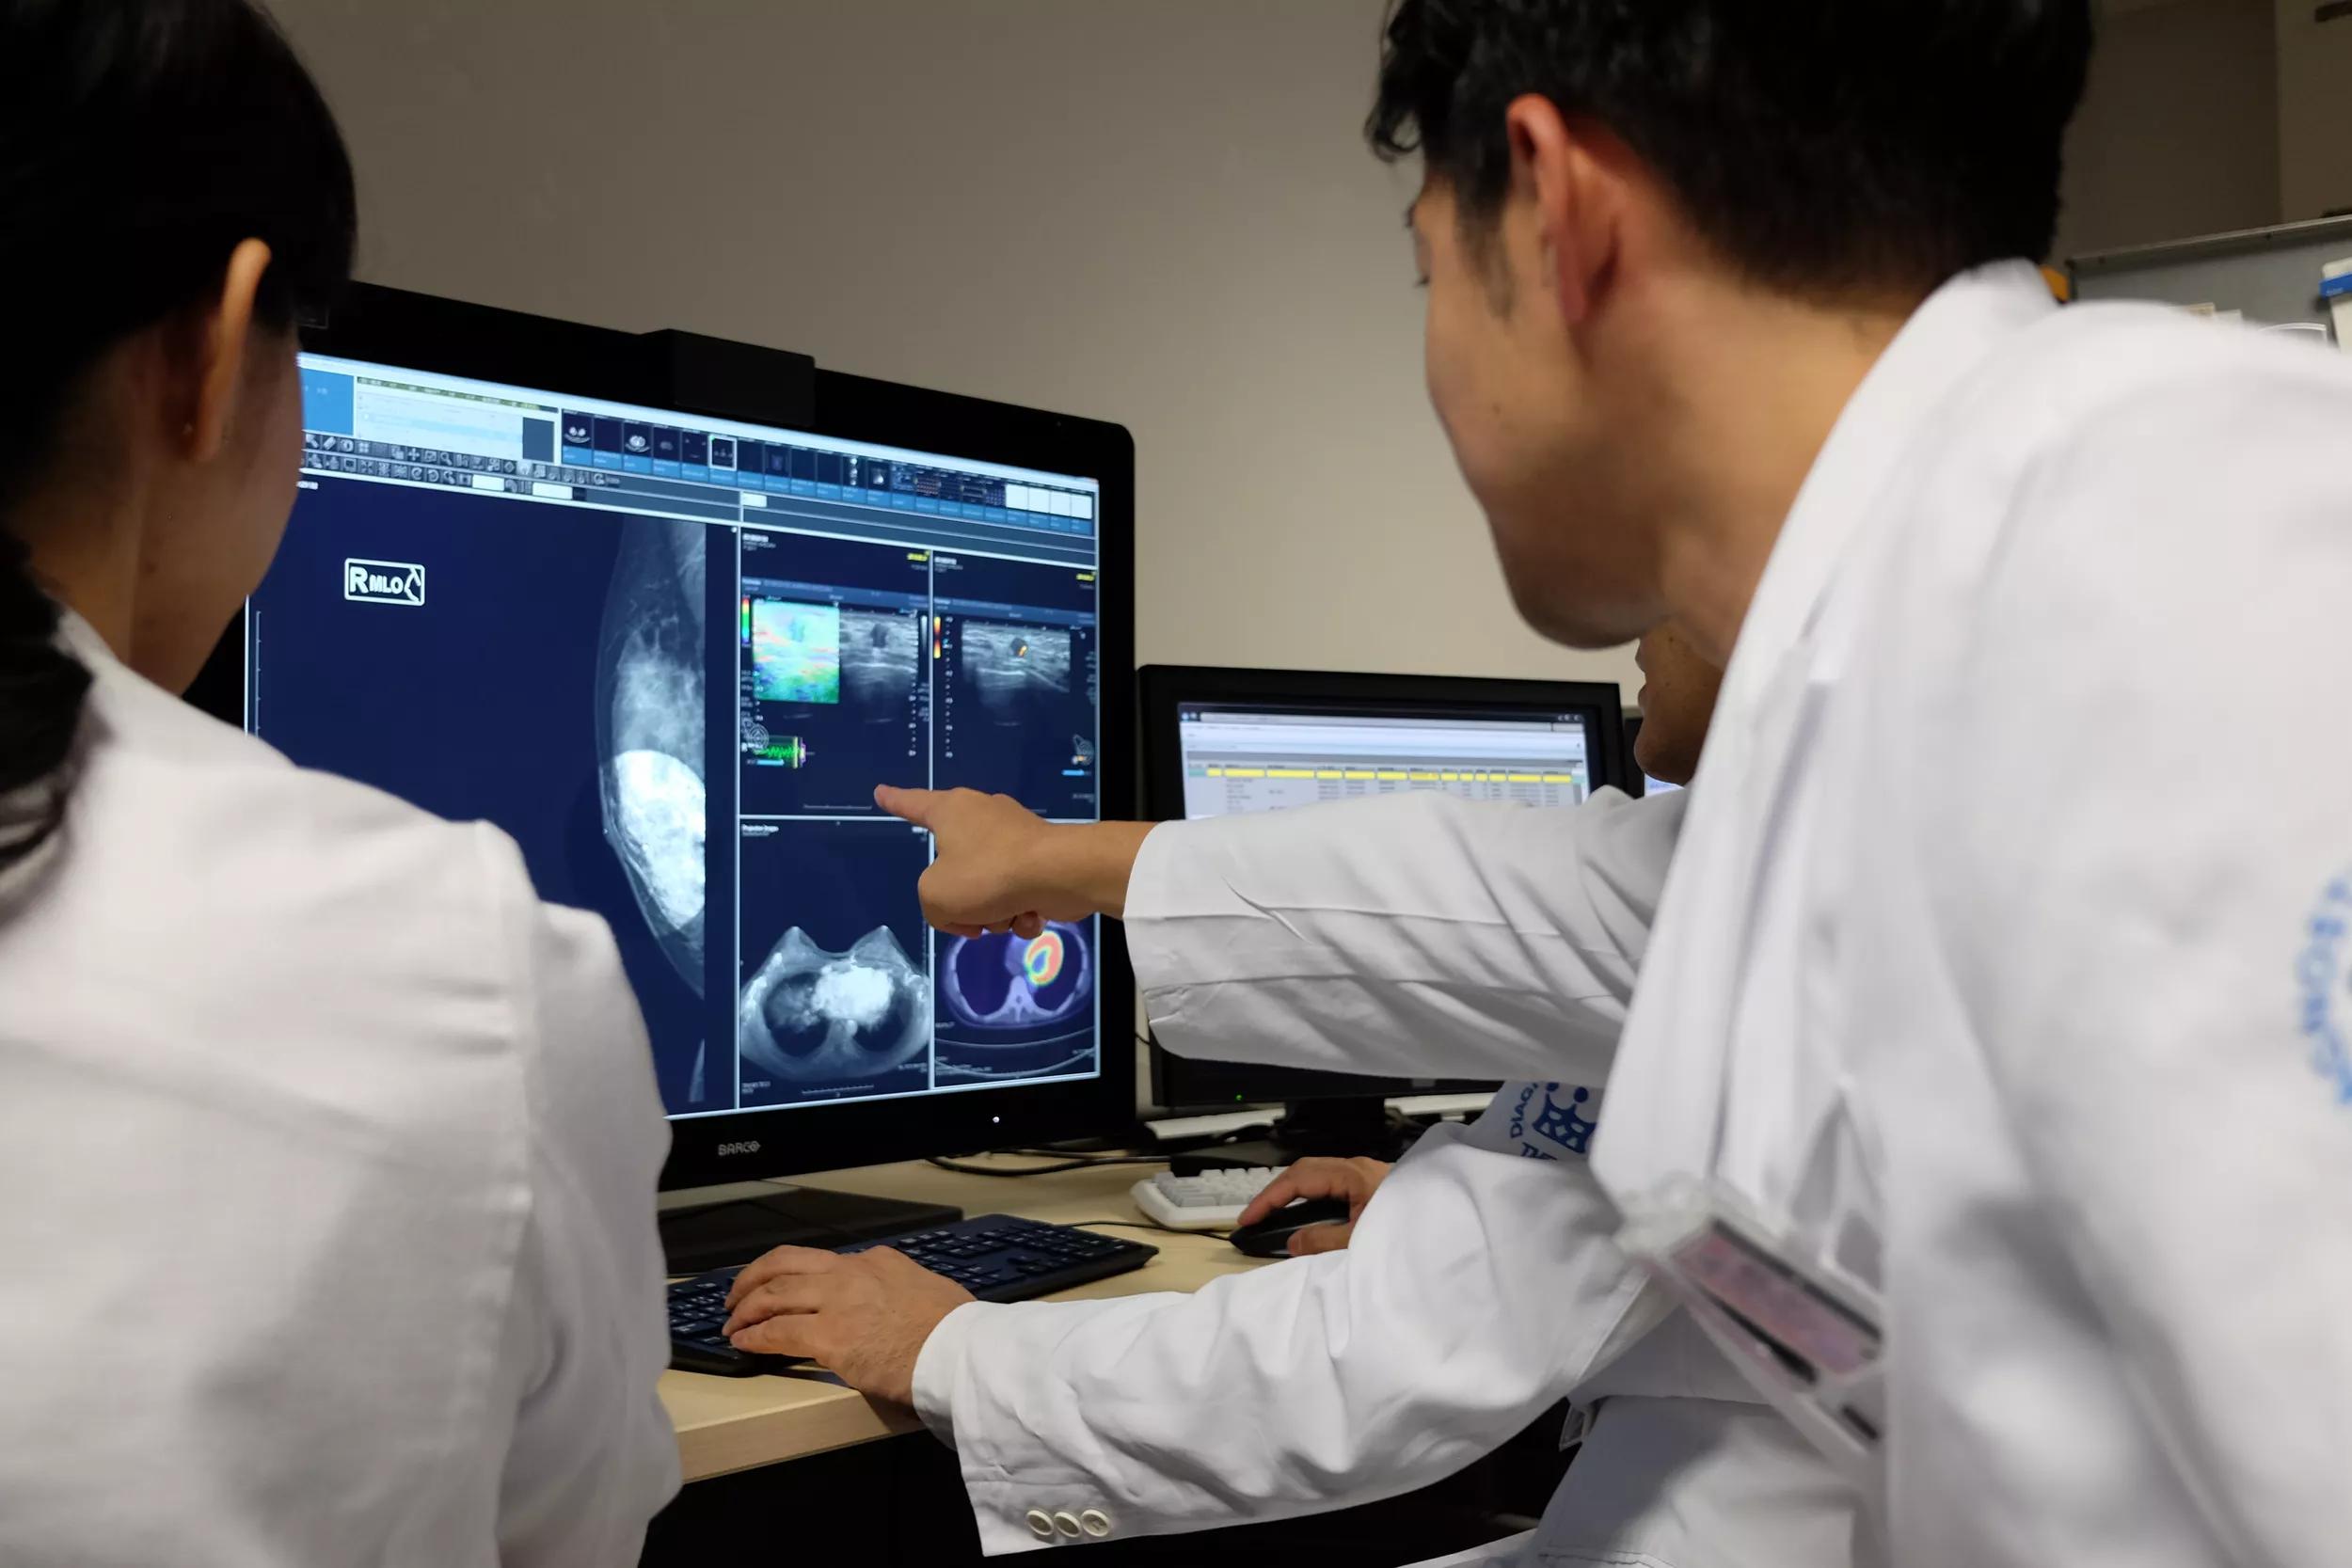 Radiologists looking at breast images together, one is pointing at something on the image